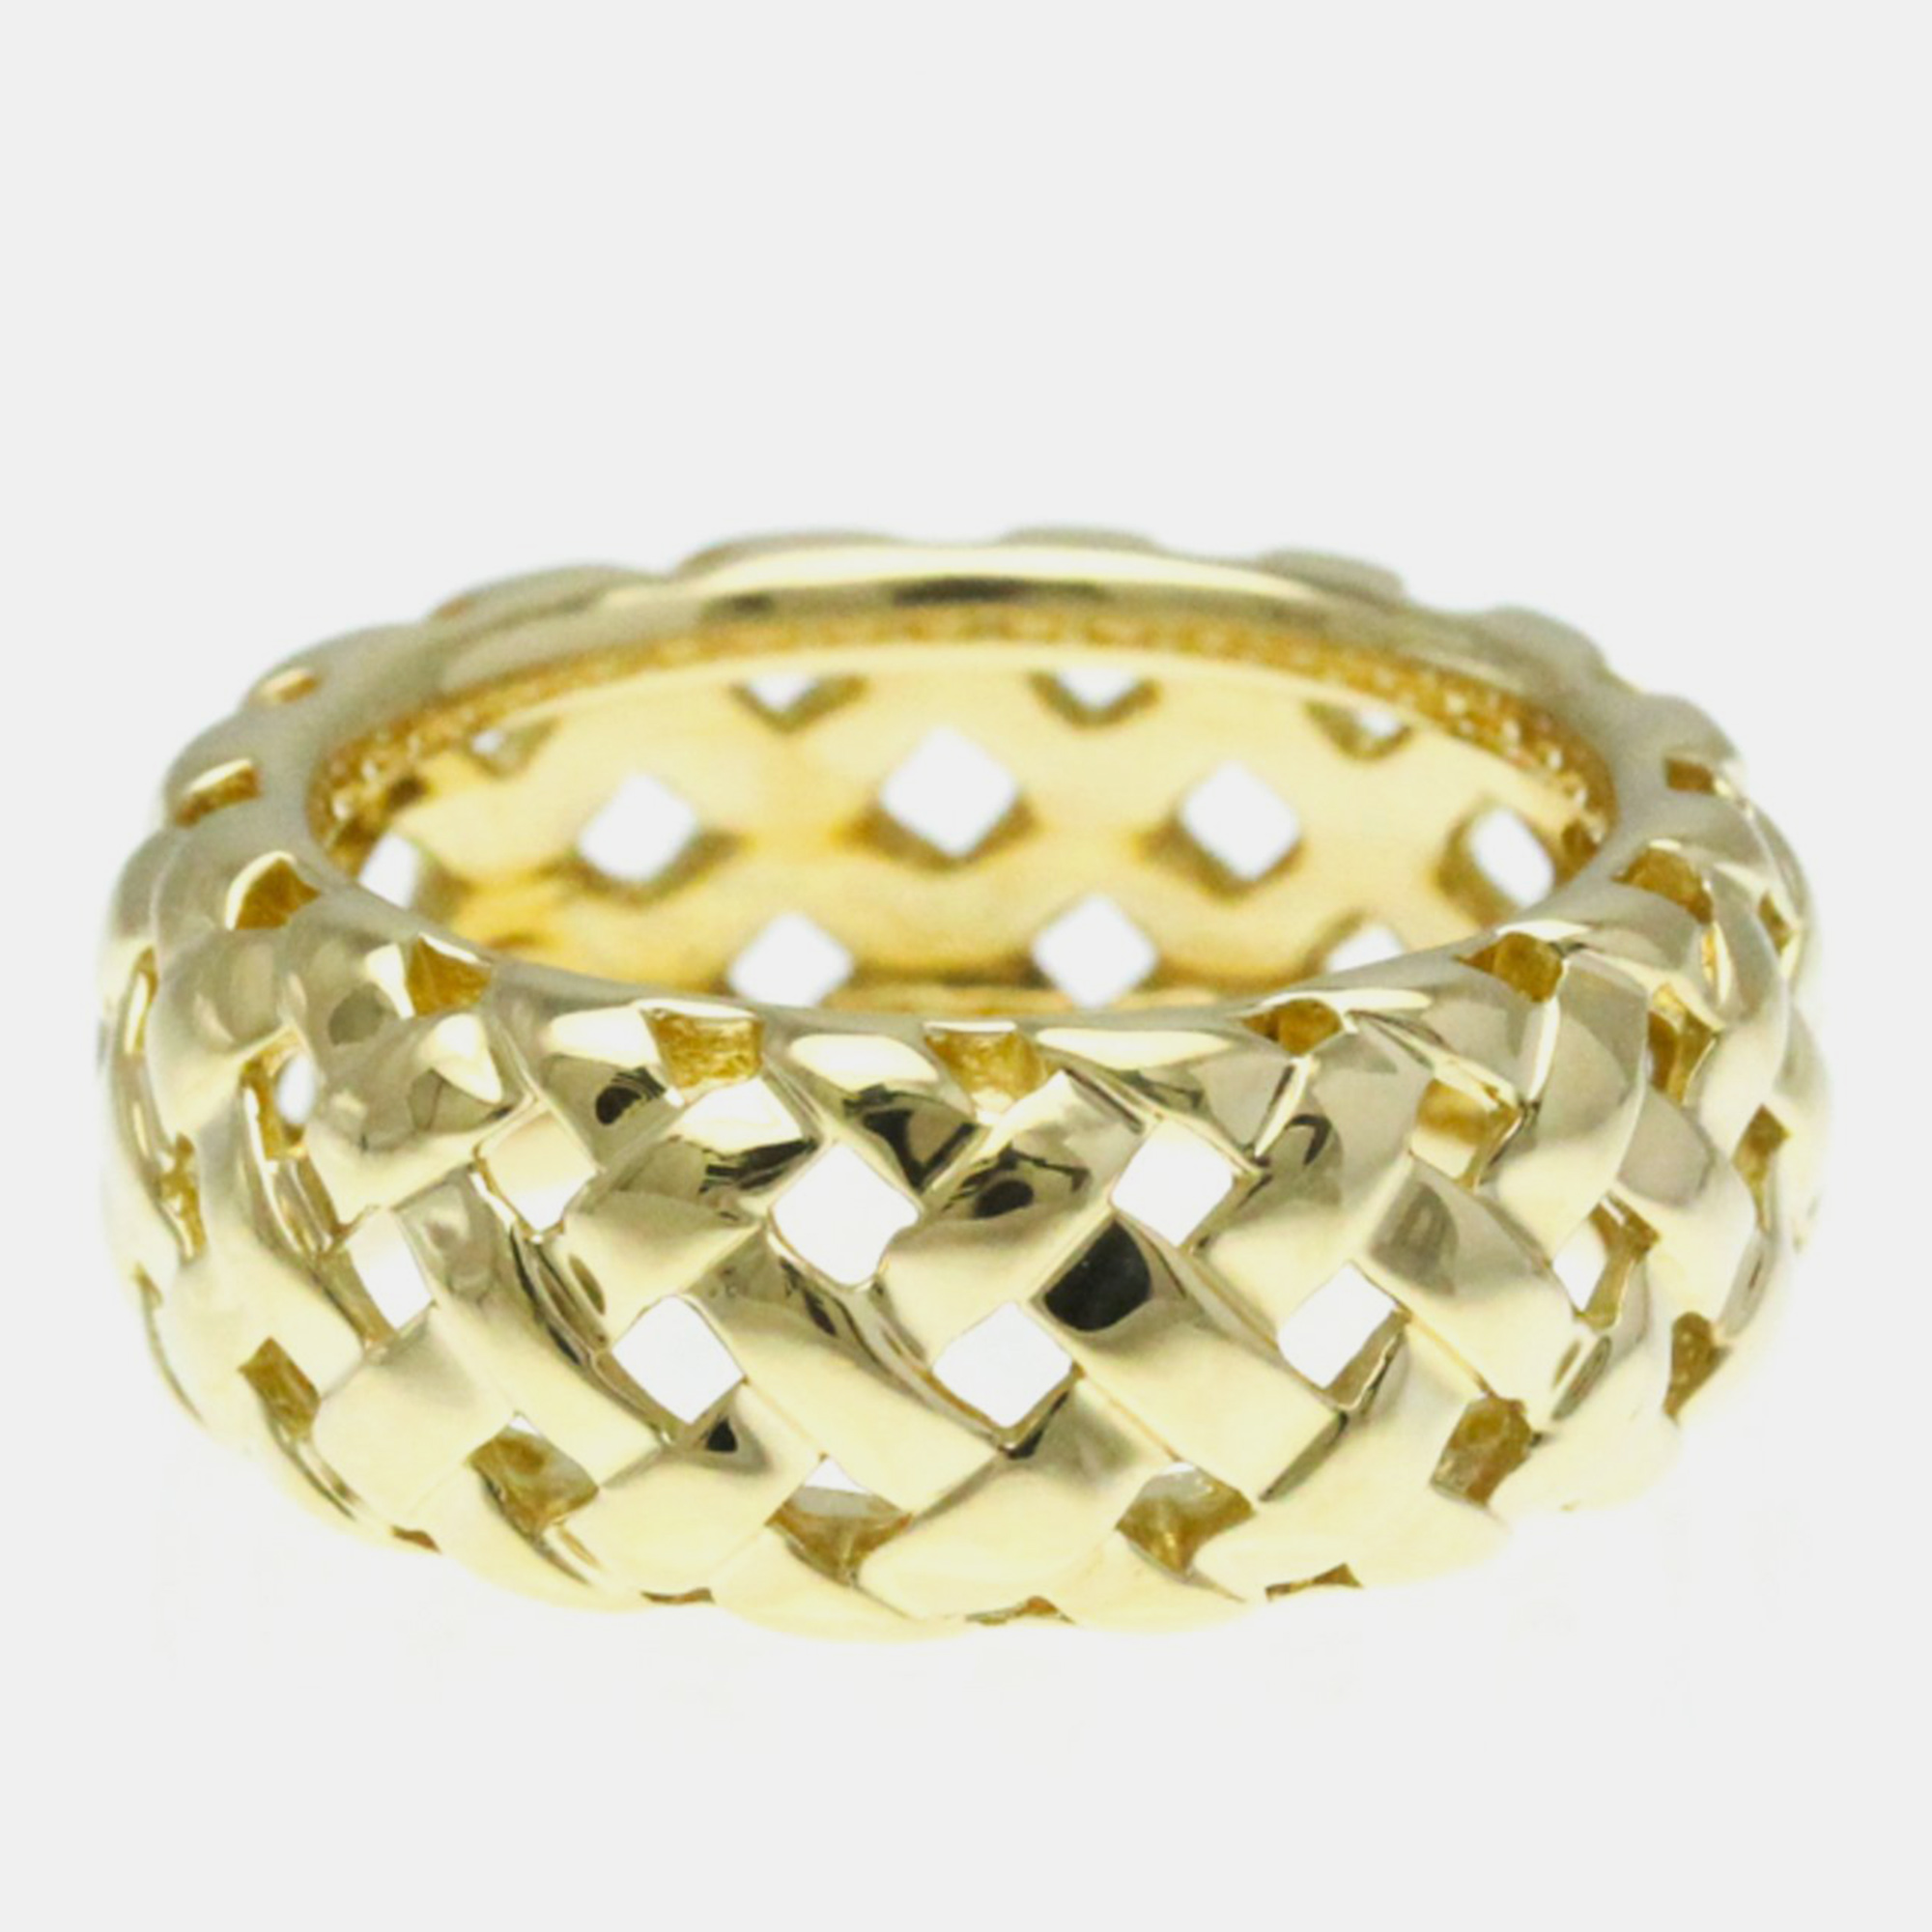 Tiffany & co. 18k yellow gold vannerie band ring eu 52